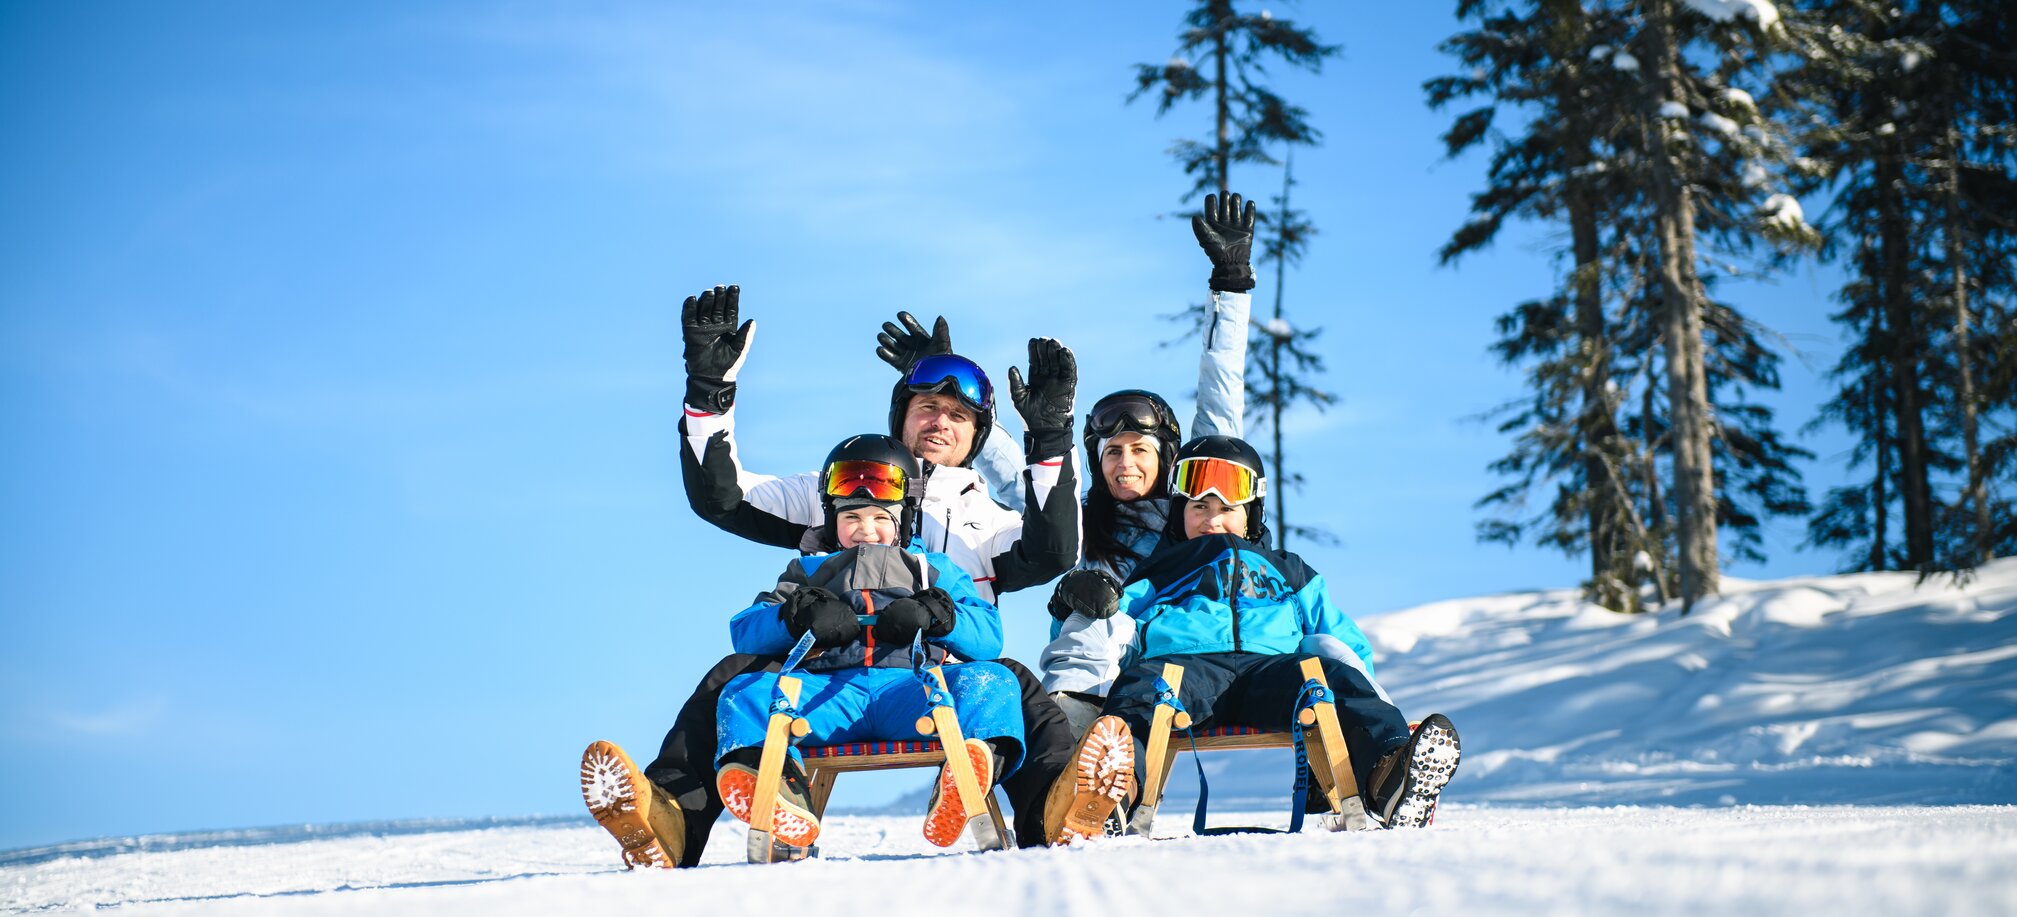 The father and mother each sit on a toboggan with a child in front of them and hold their hands up in joyful anticipation